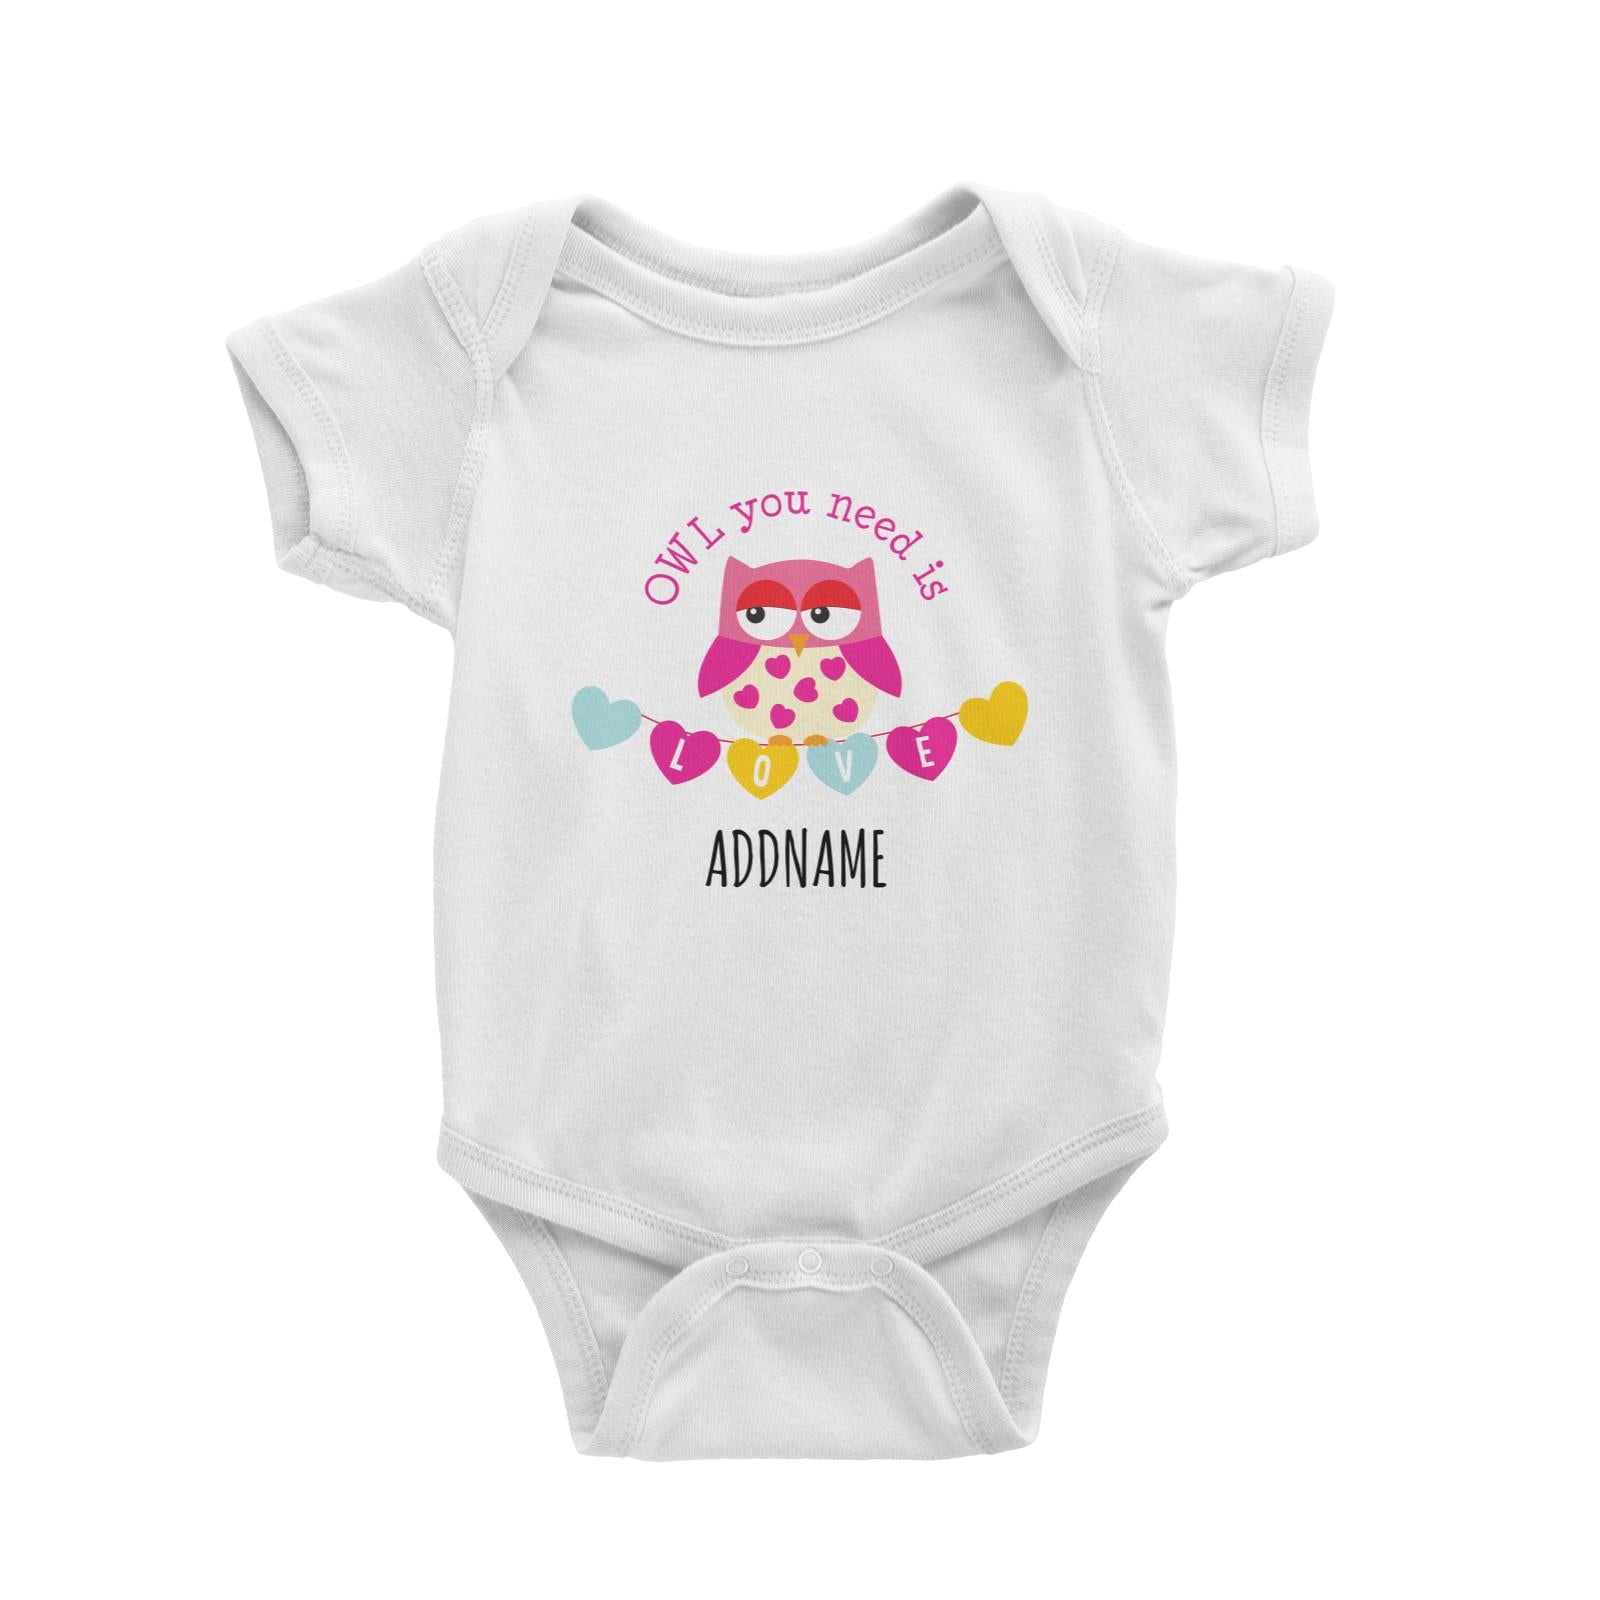 Owl You Need is Love White White Baby Romper